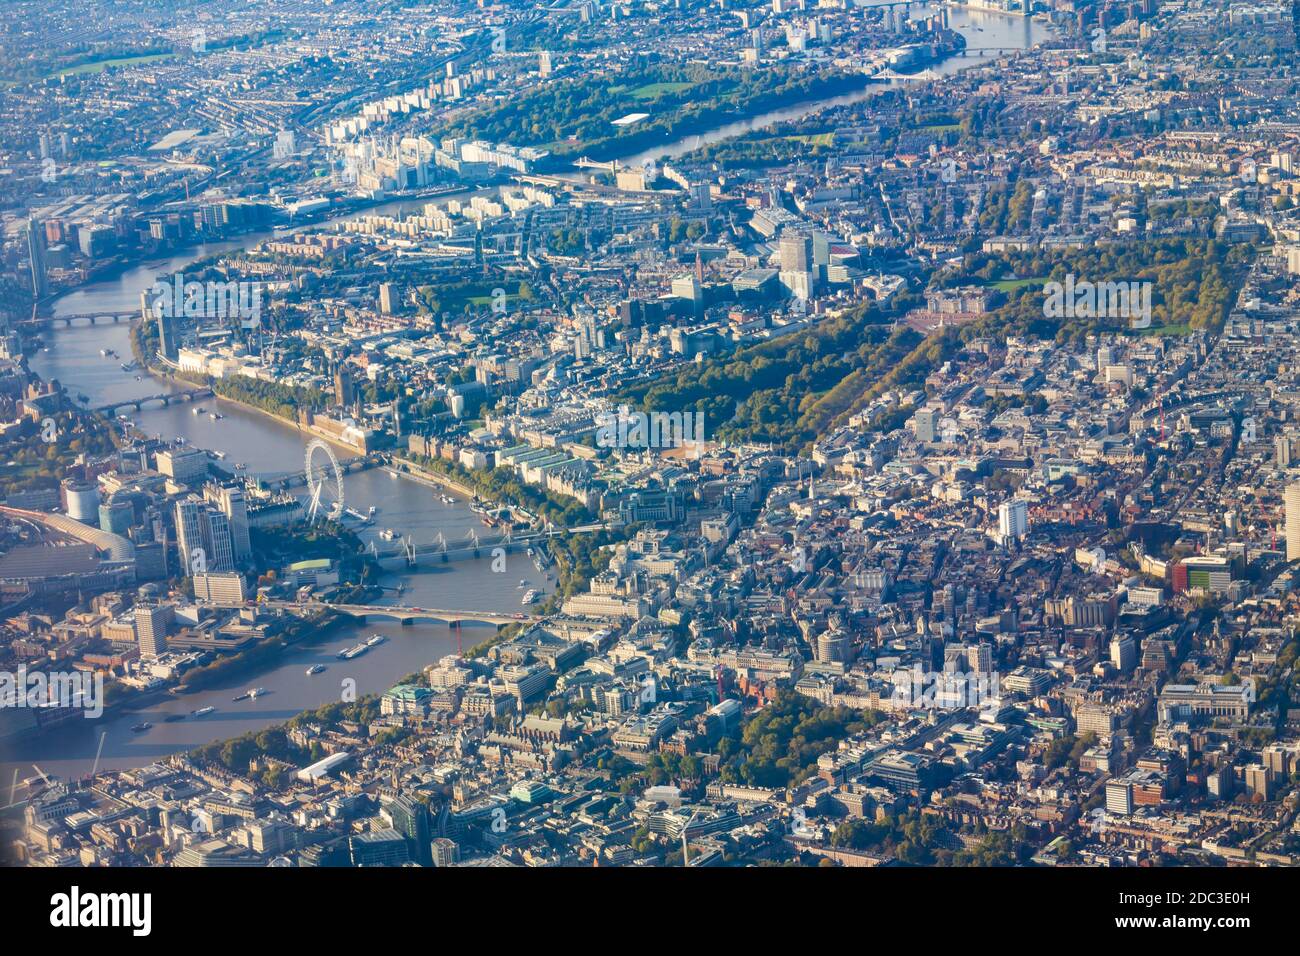 Aerial view over London, the capital city of England. Stock Photo